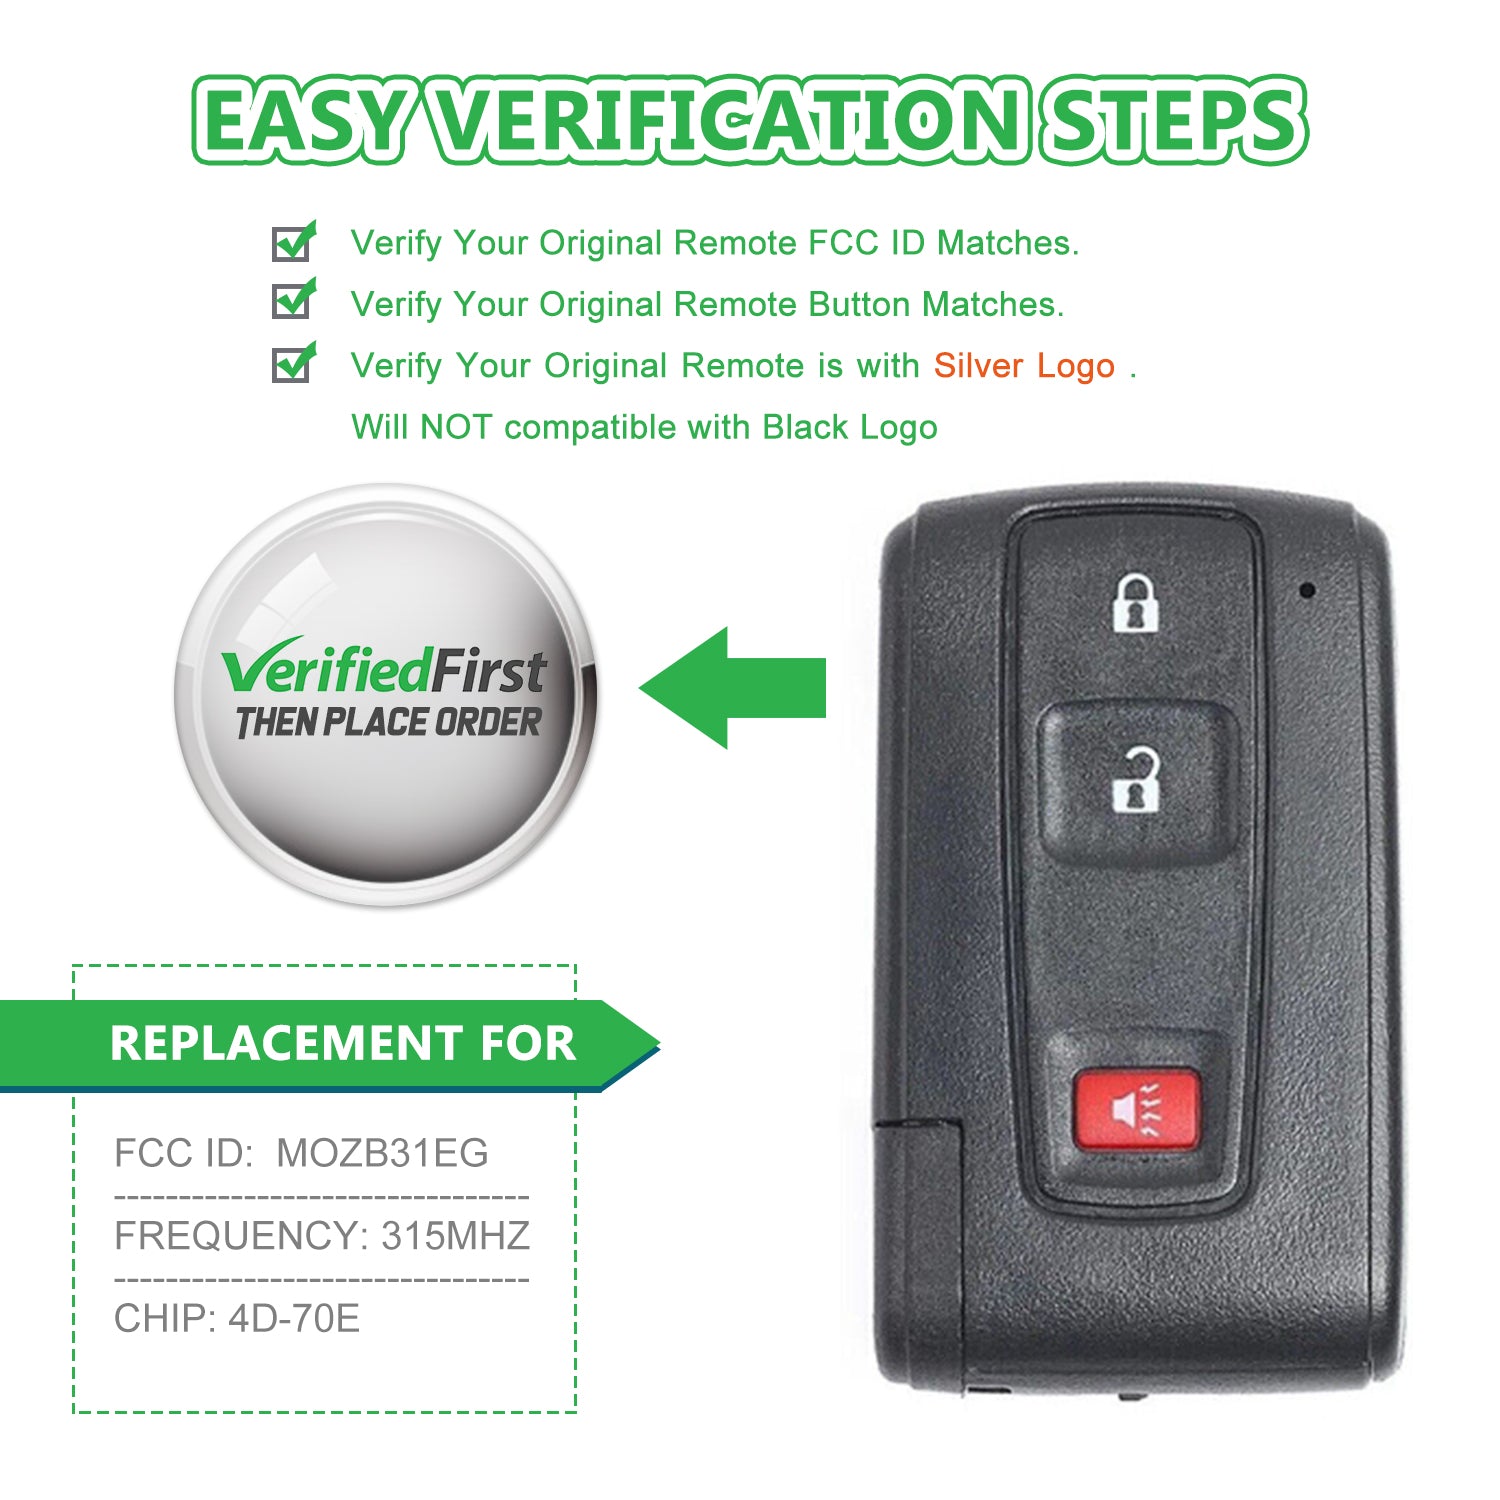 Lots of 10 Smart Car Key Fob Replacement for Toyota Prius (Silver Logo Only) fits 2004 2005 2006 2007 2008 2009 Proximity 3 Button Remote MOZB31EG 4D-70E Chip